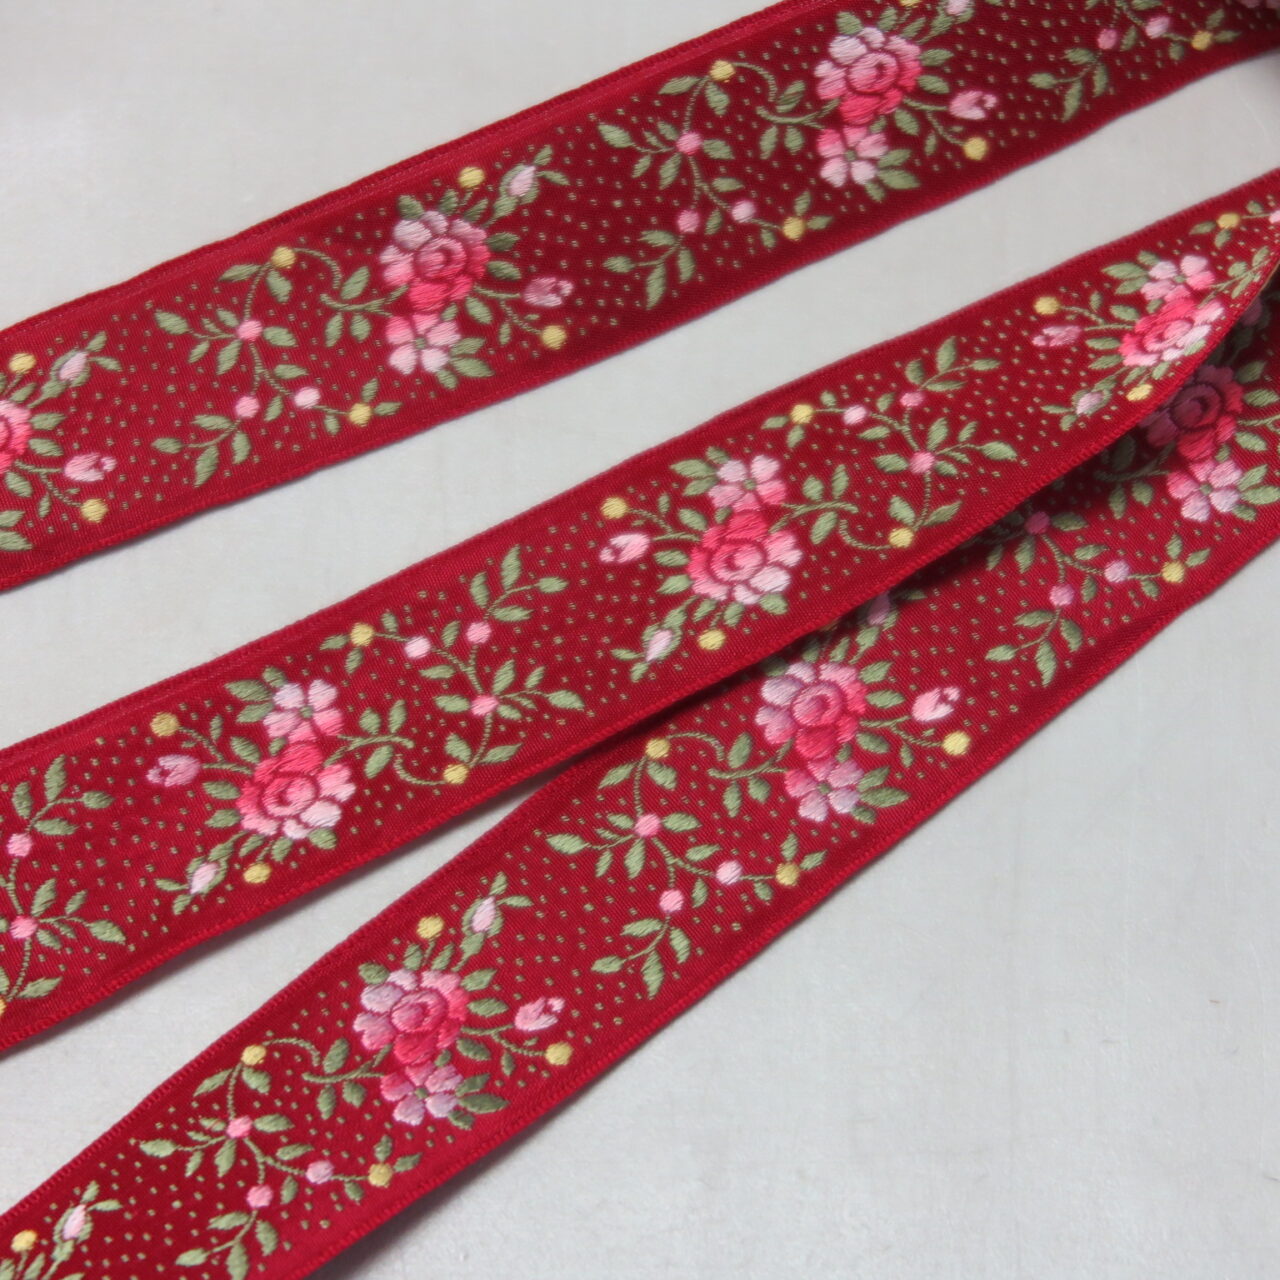 Jacquard Ribbon, Classic Floral Lifted Pattern, 1 1/8 inches wide